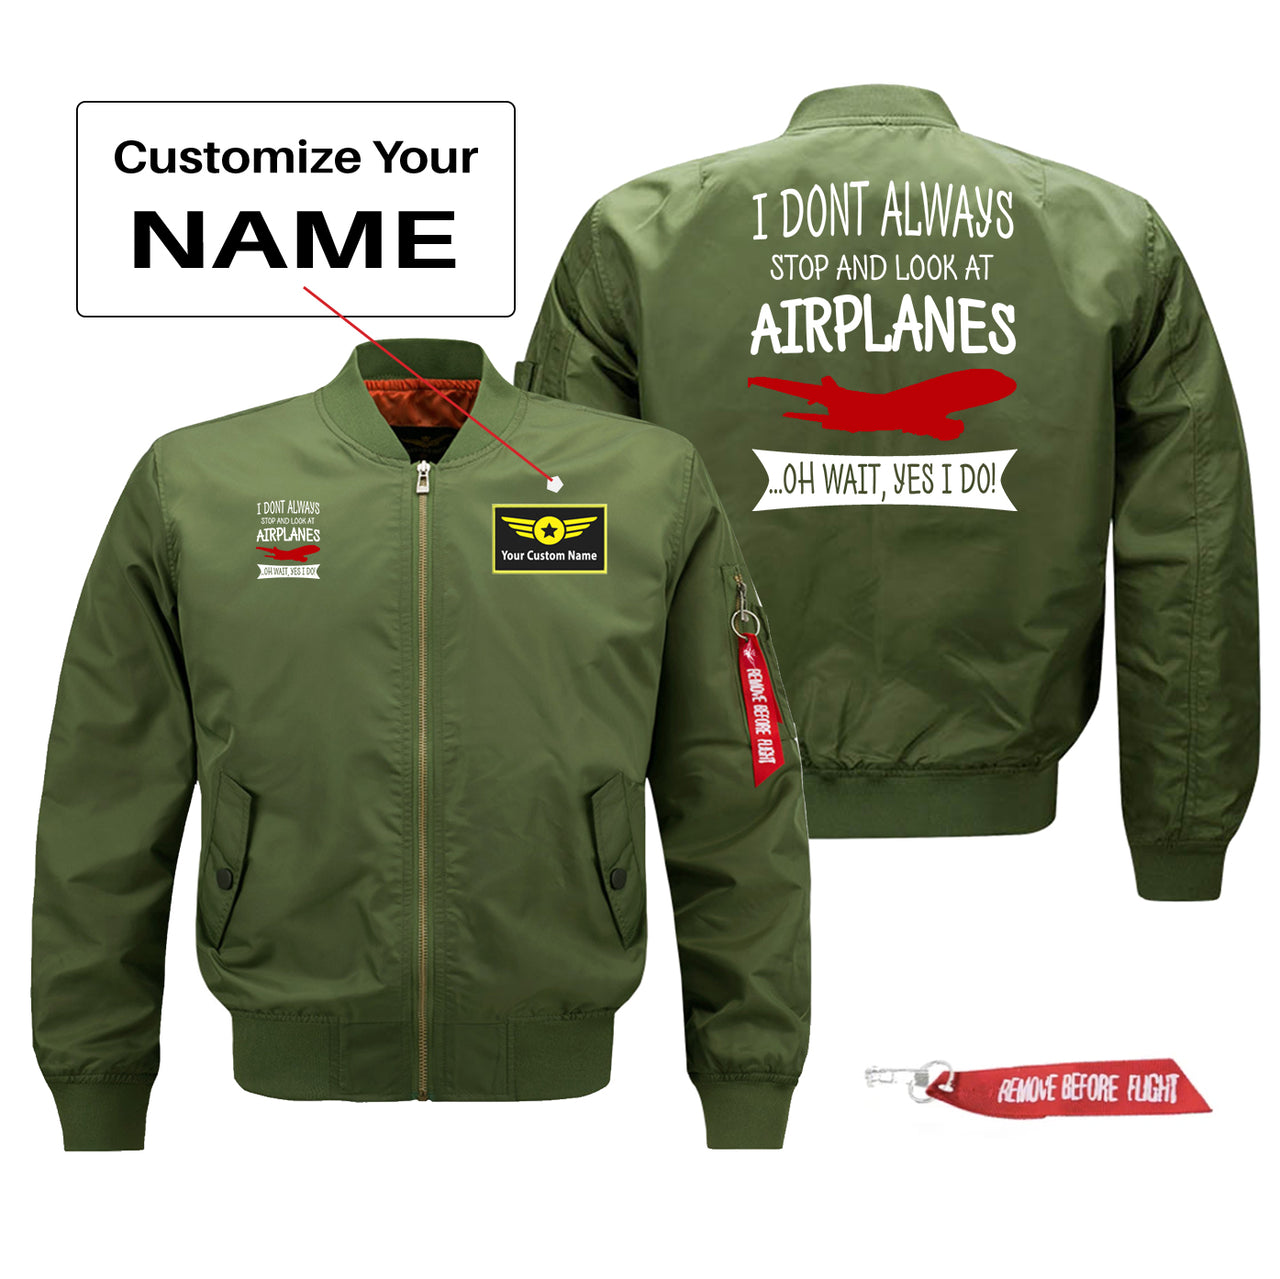 I Don't Always Stop and Look at Airplanes Designed Pilot Jackets (Customizable)